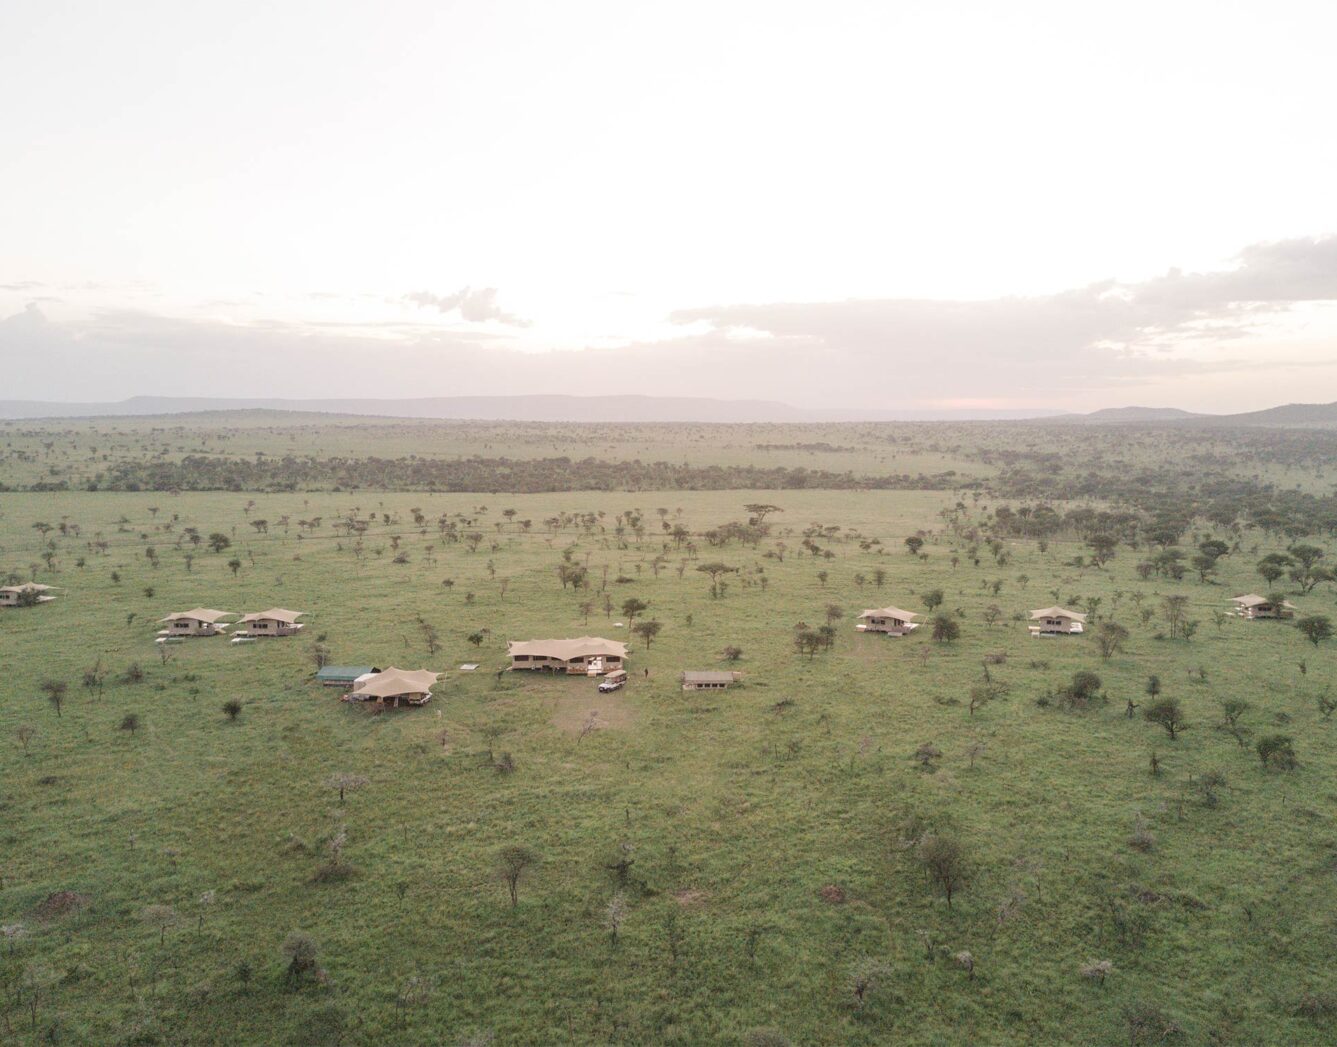 An arial view of the Roving Bushtops camp